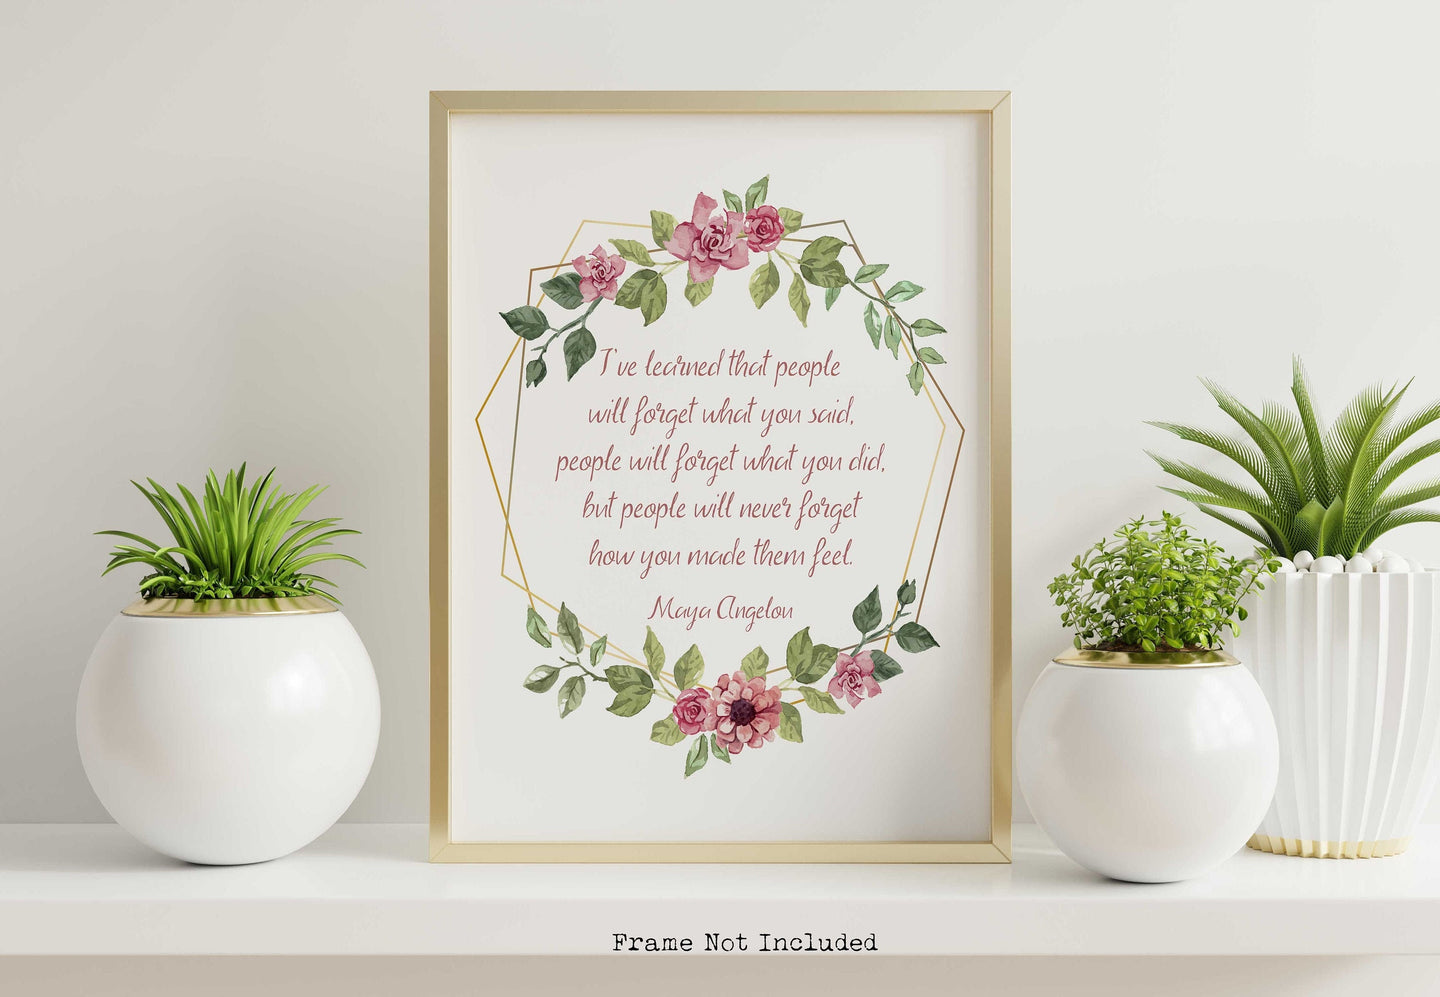 Maya Angelou Print - I've learned that people will never forget how you made them feel - Unframed inspirational print for Home, poster